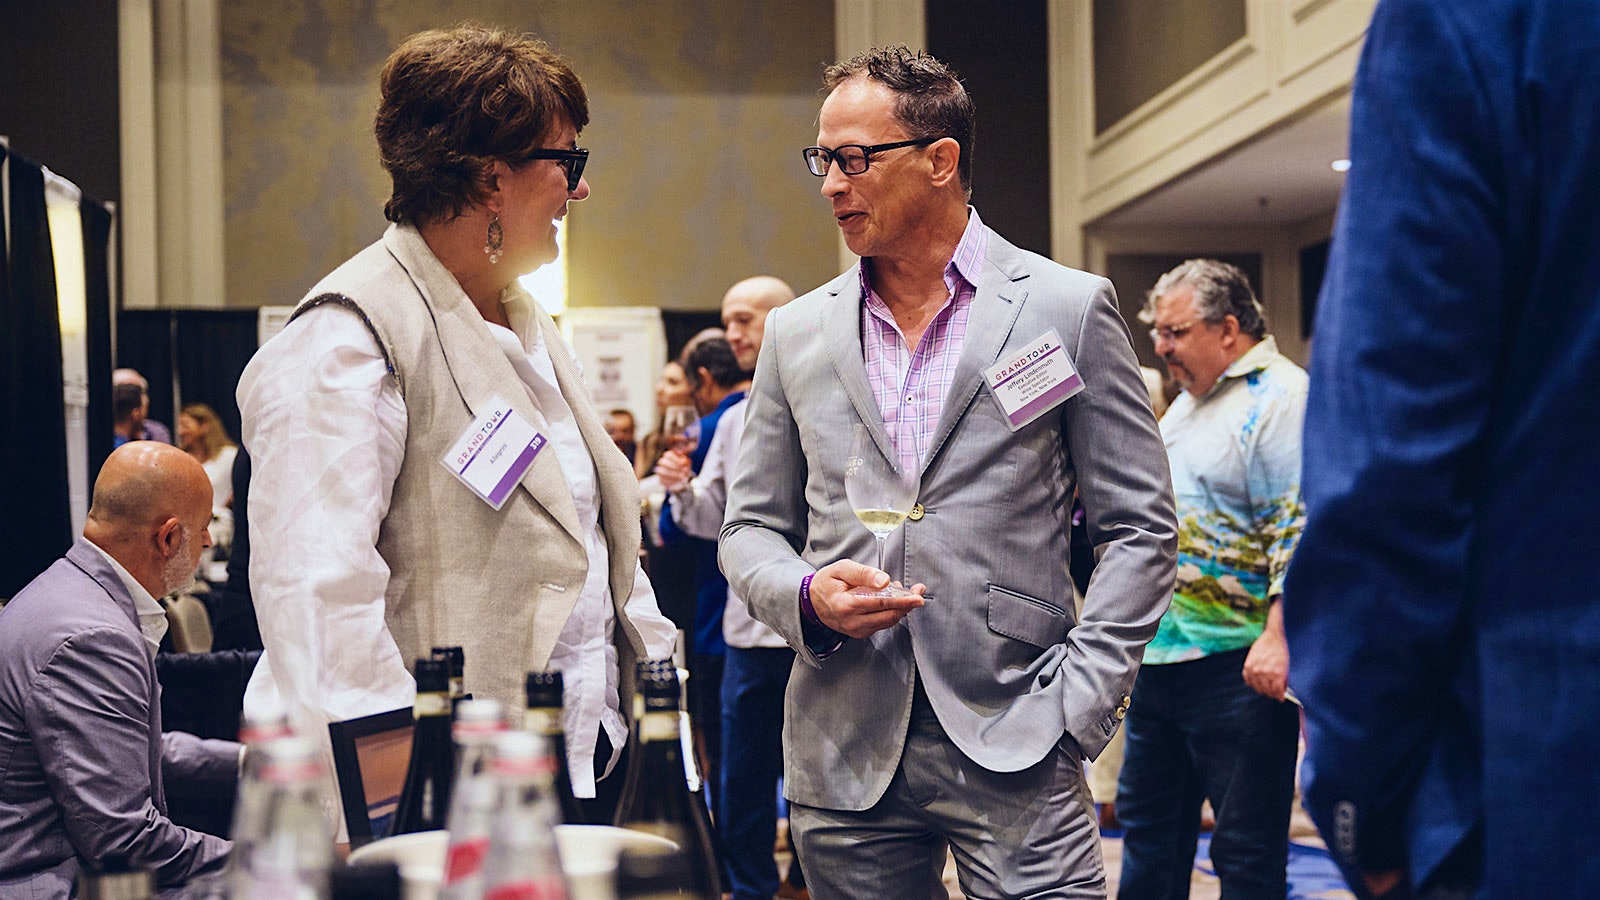  Wine Spectator executive editor Jeffery Lindenmuth chats with Silvia Allegrini at the Wine Spectator Grand Tour in New Orleans.